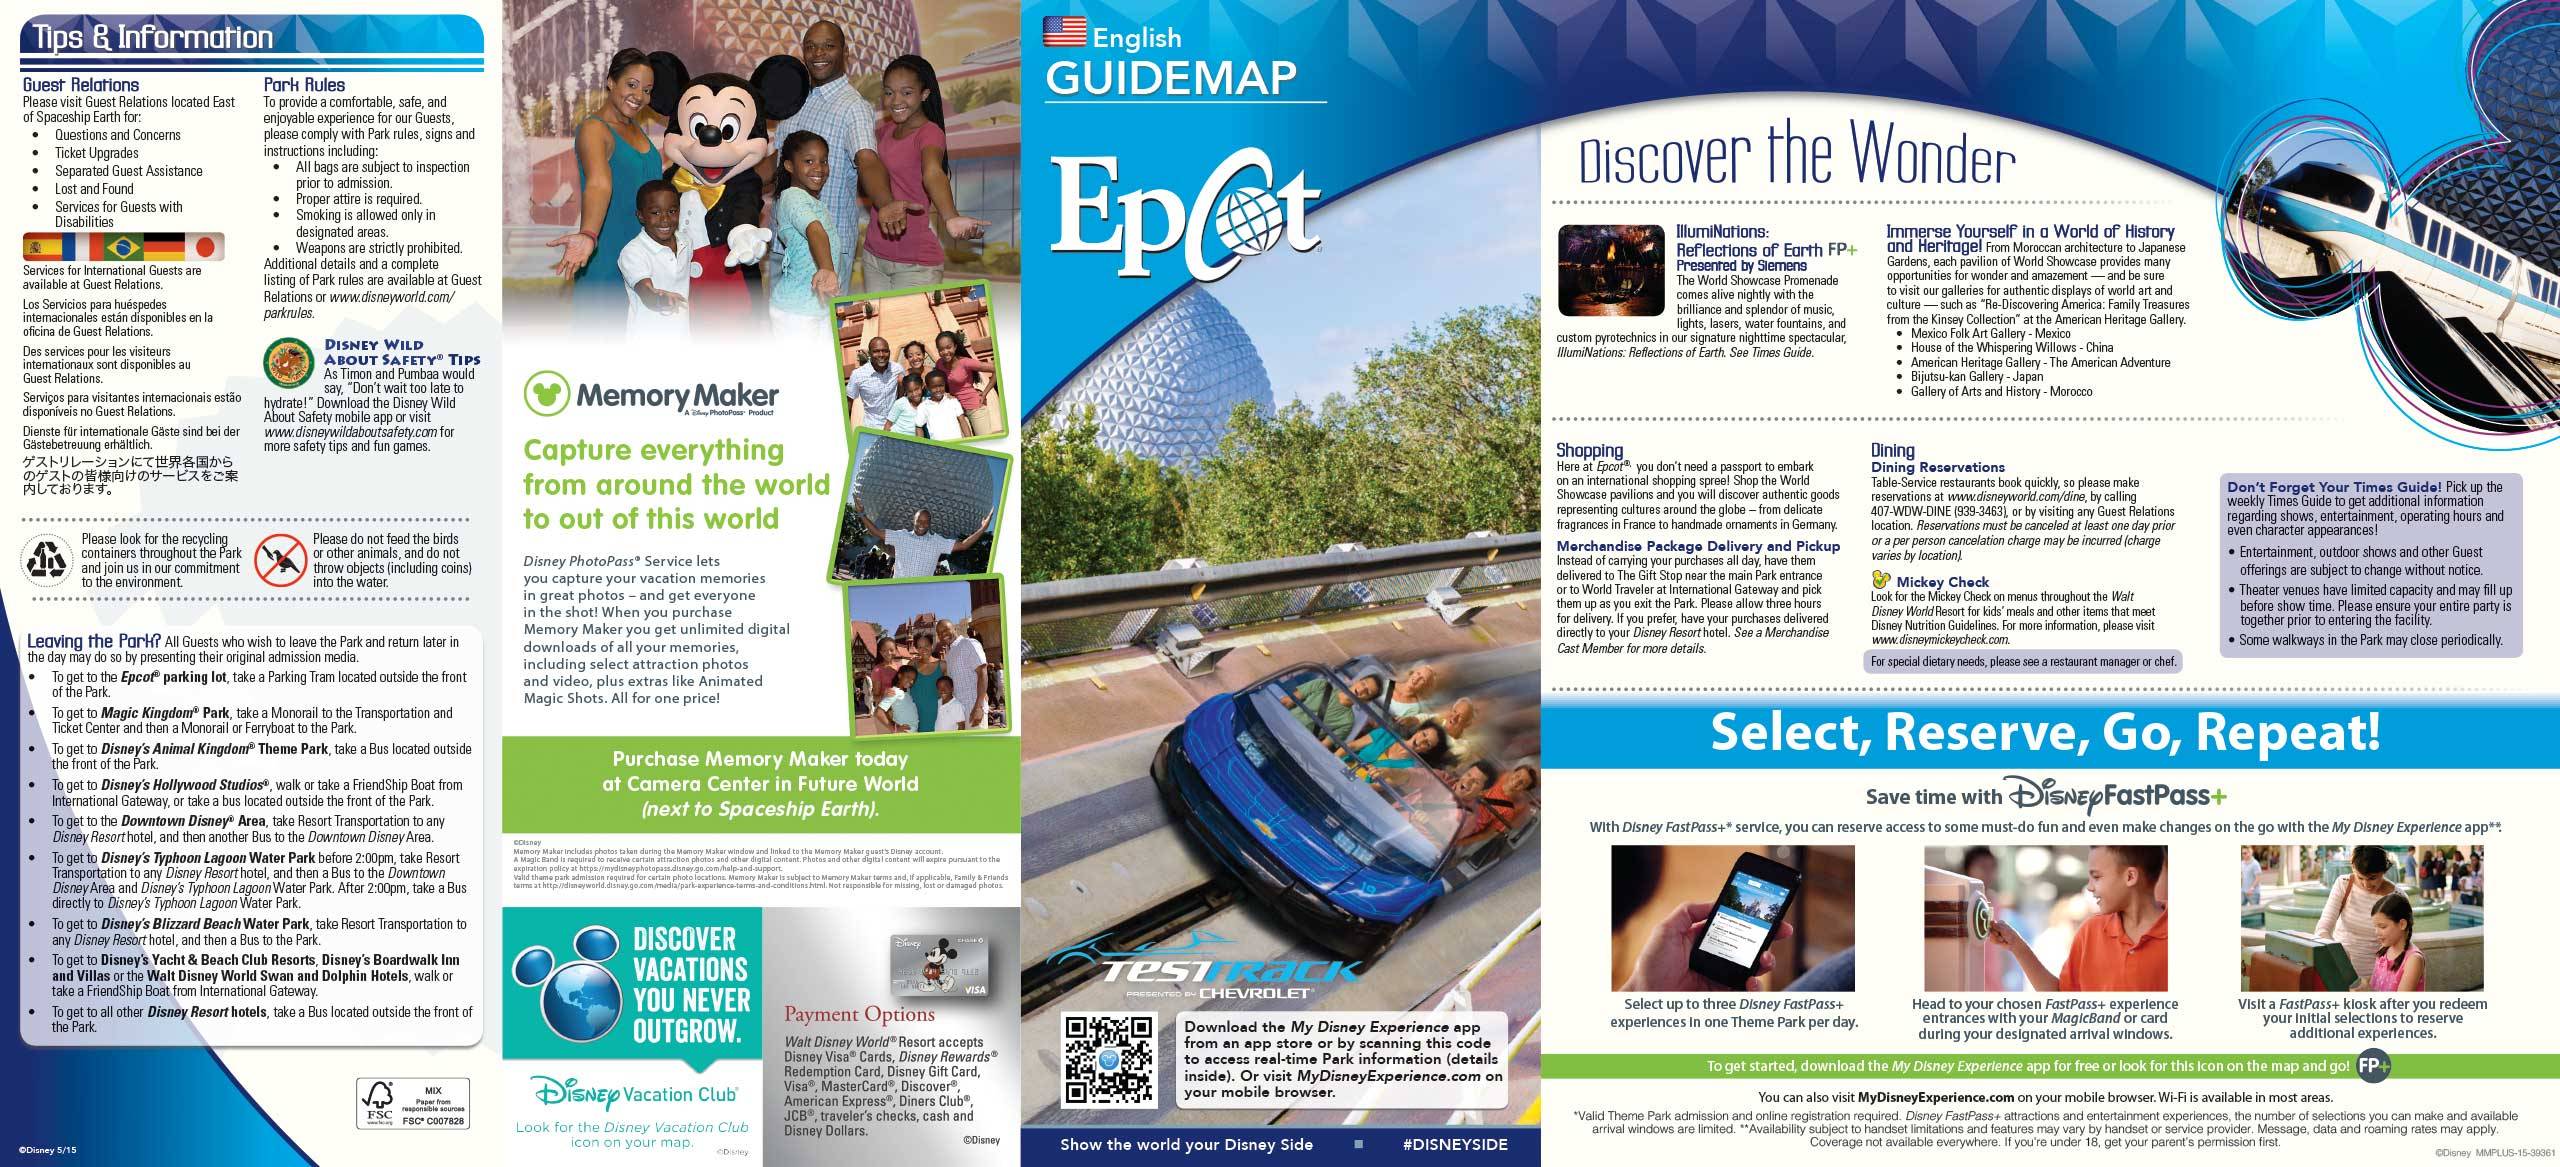 Epcot Guide Map May 2015 - Front